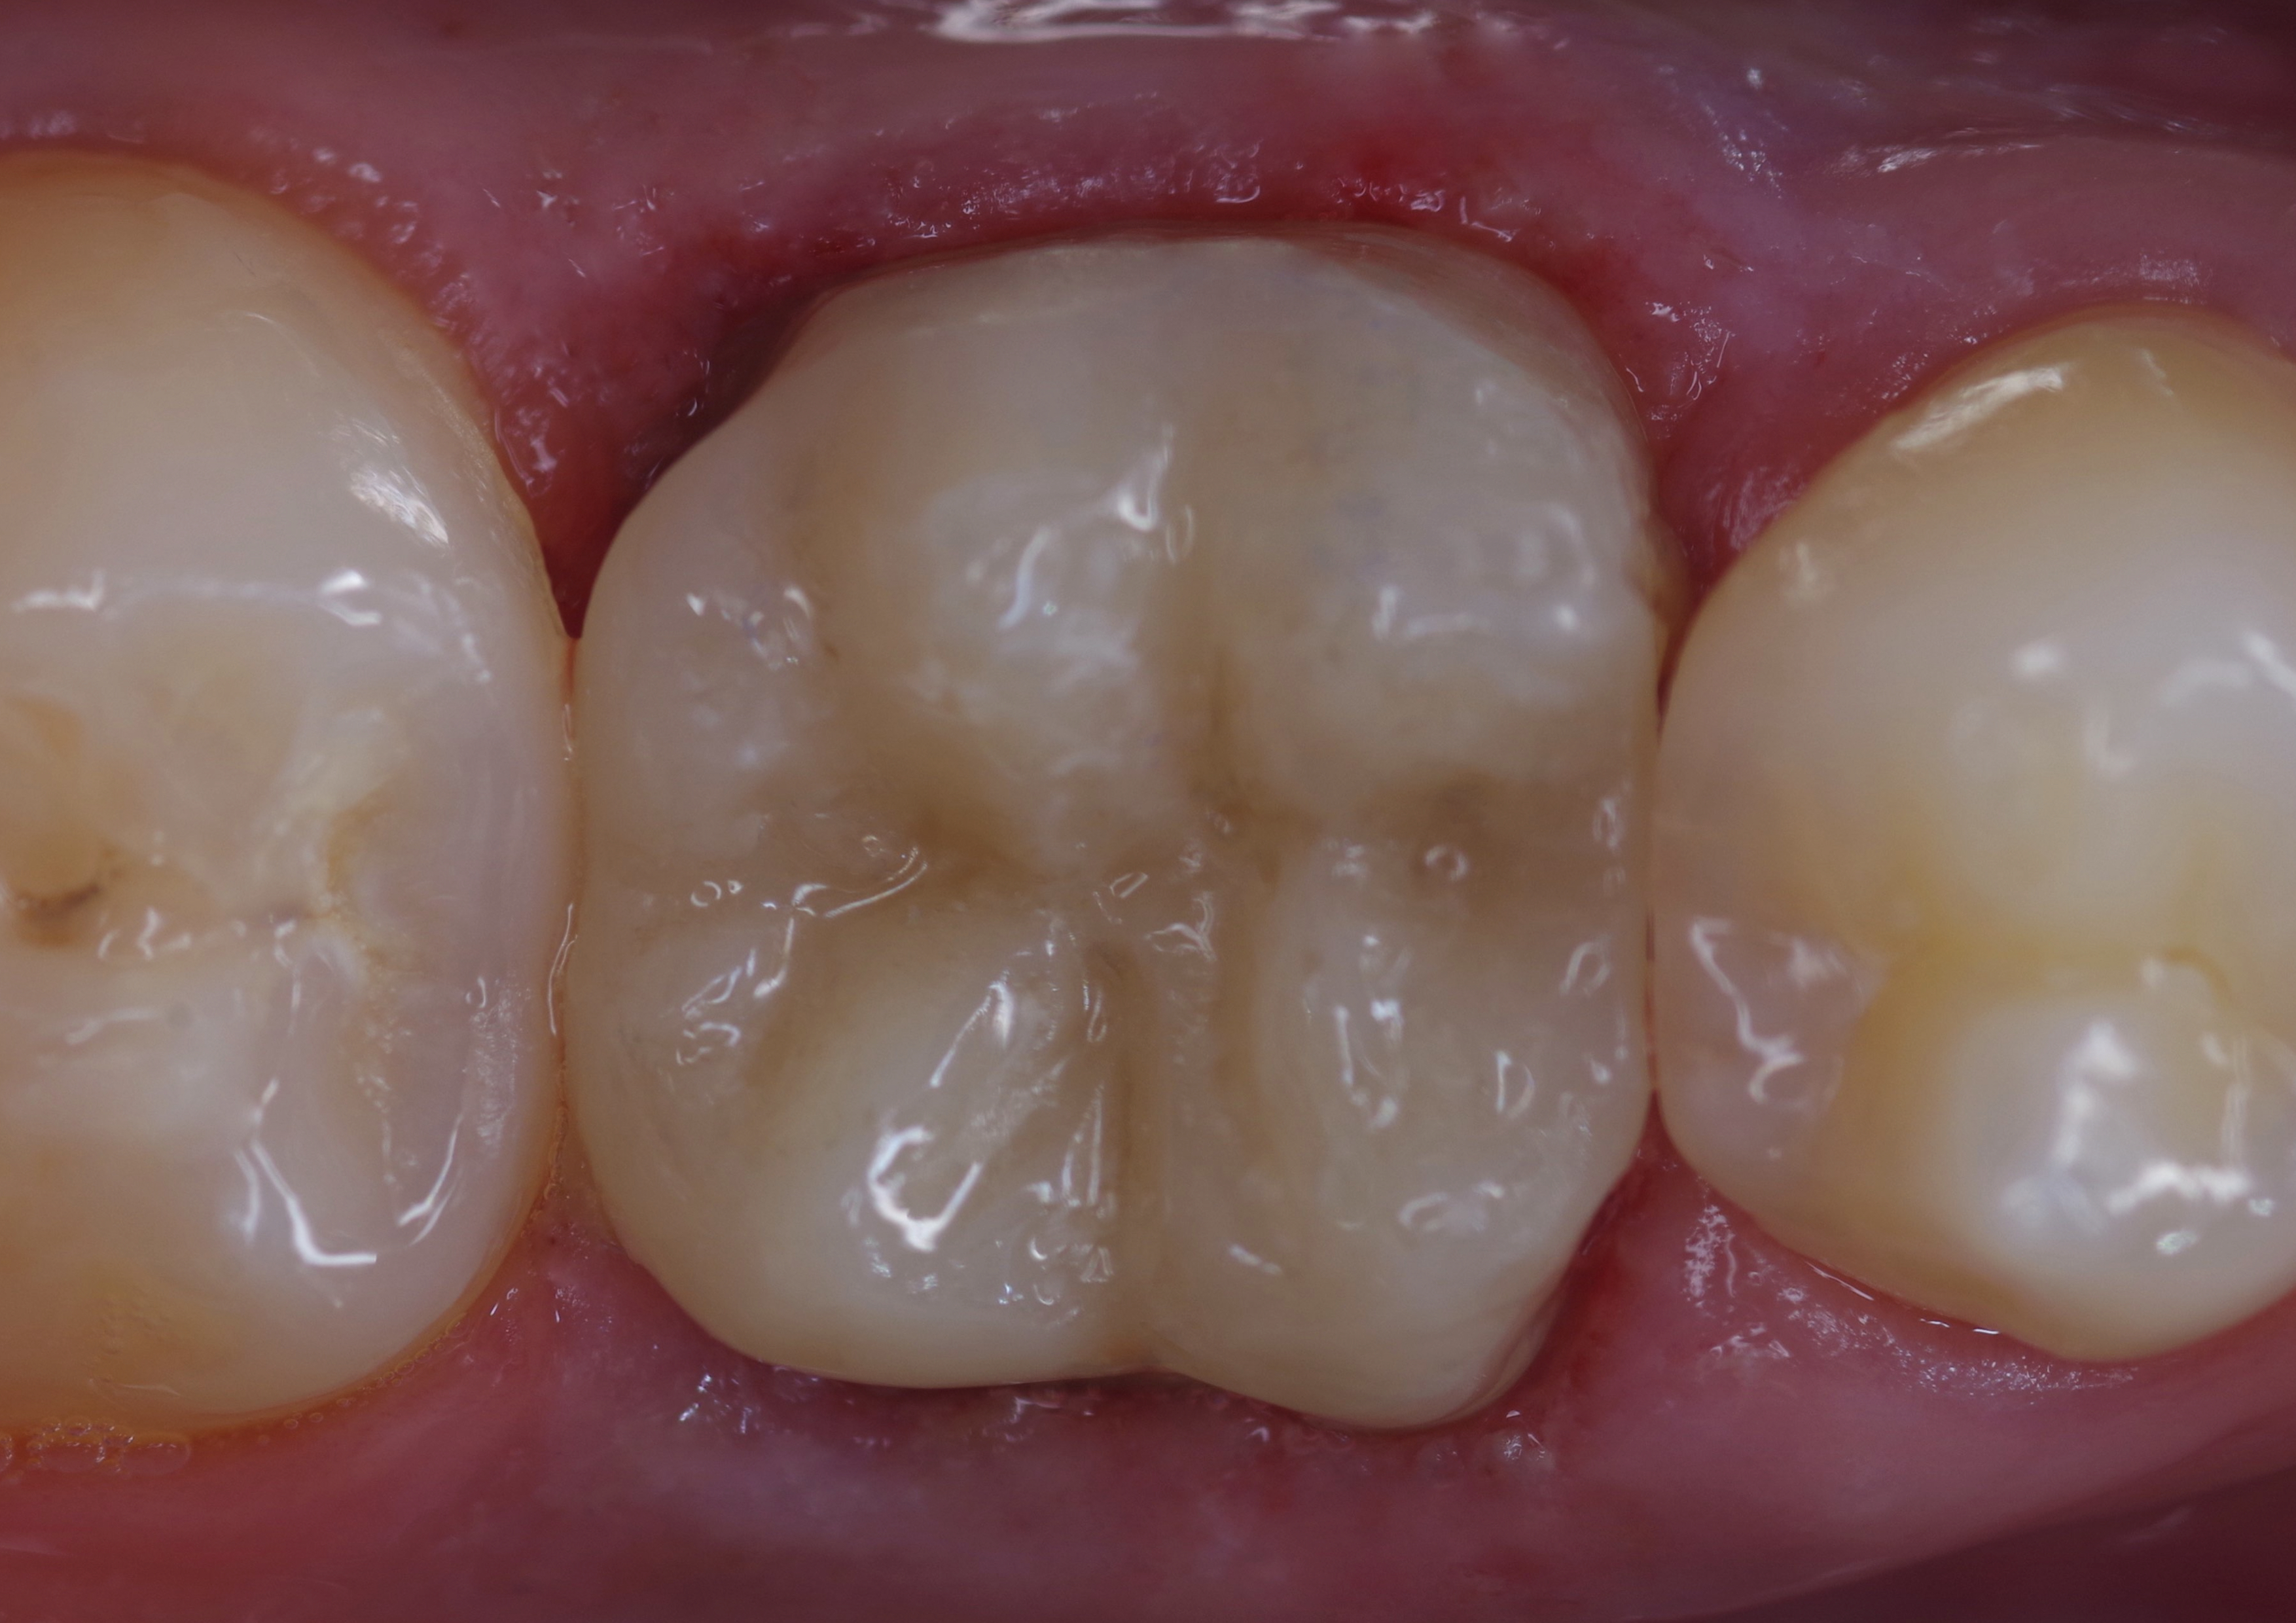 Fig. 22: After polishing of the occlusal surface. The gingivae had been injured and needed to heal.